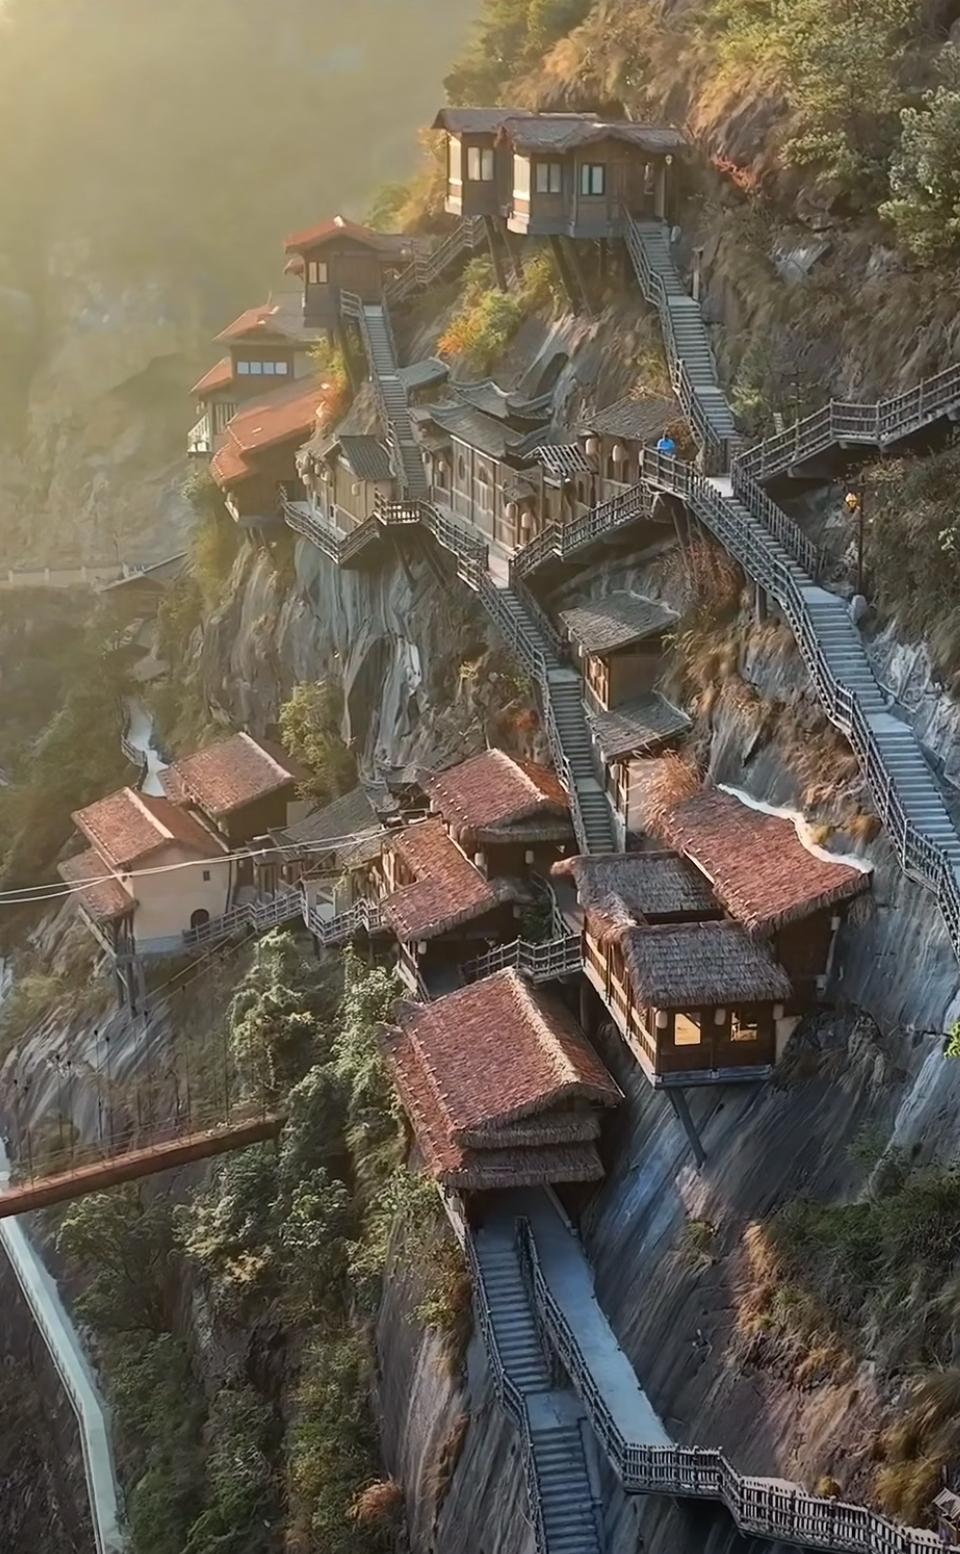 a village on a cliff